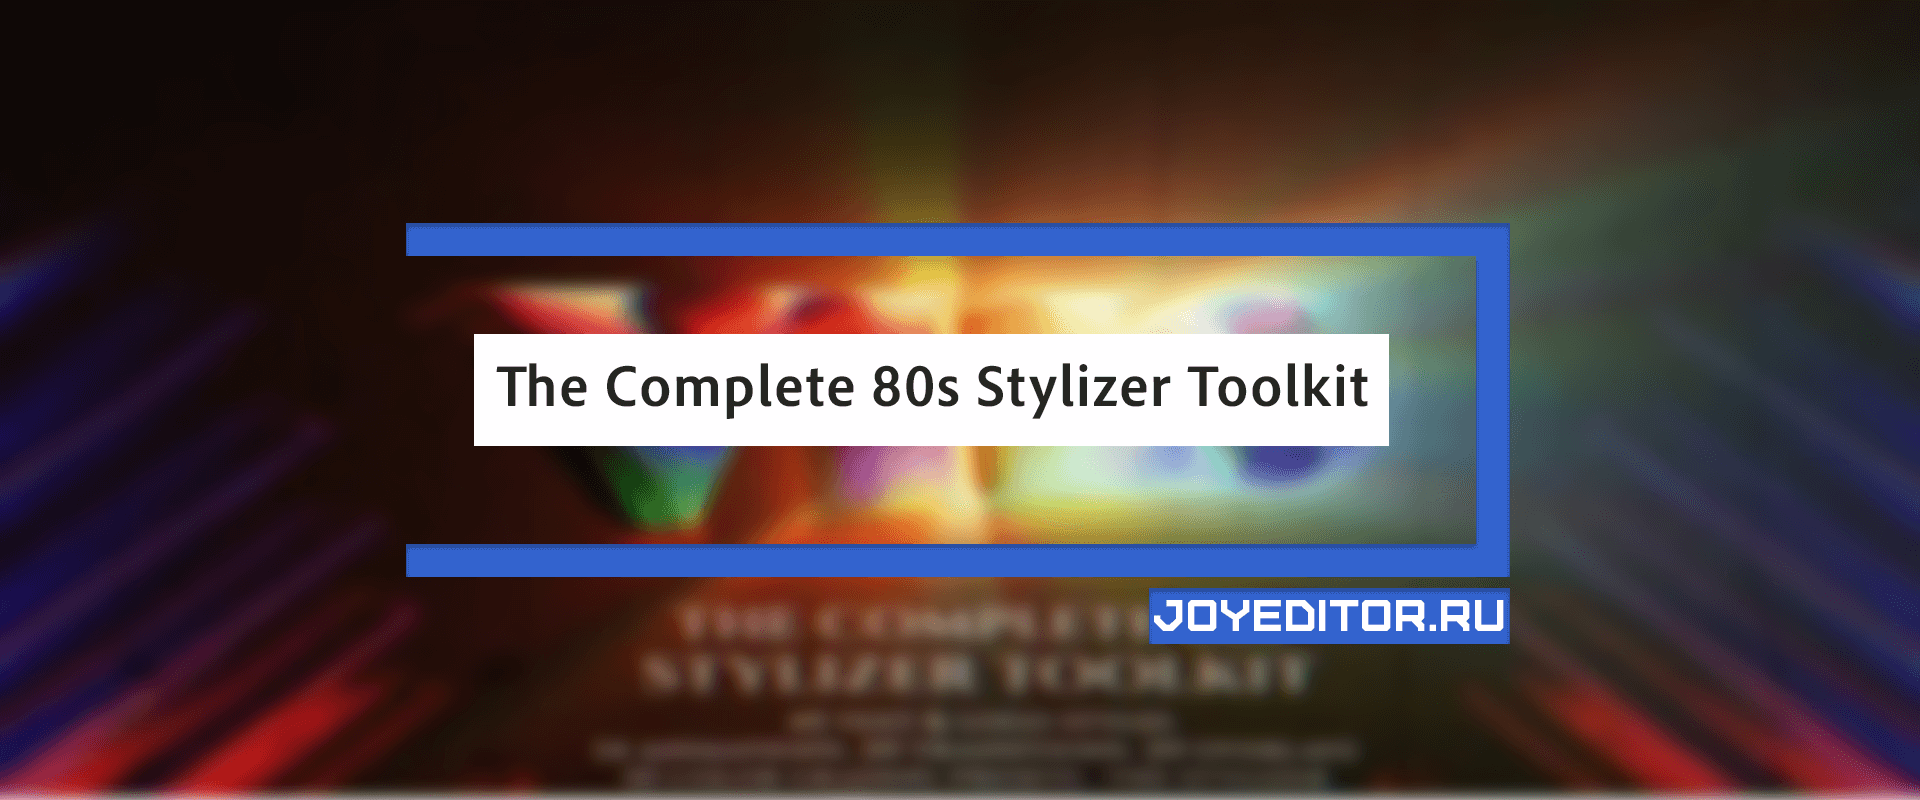 The Complete 80s Stylizer Toolkit